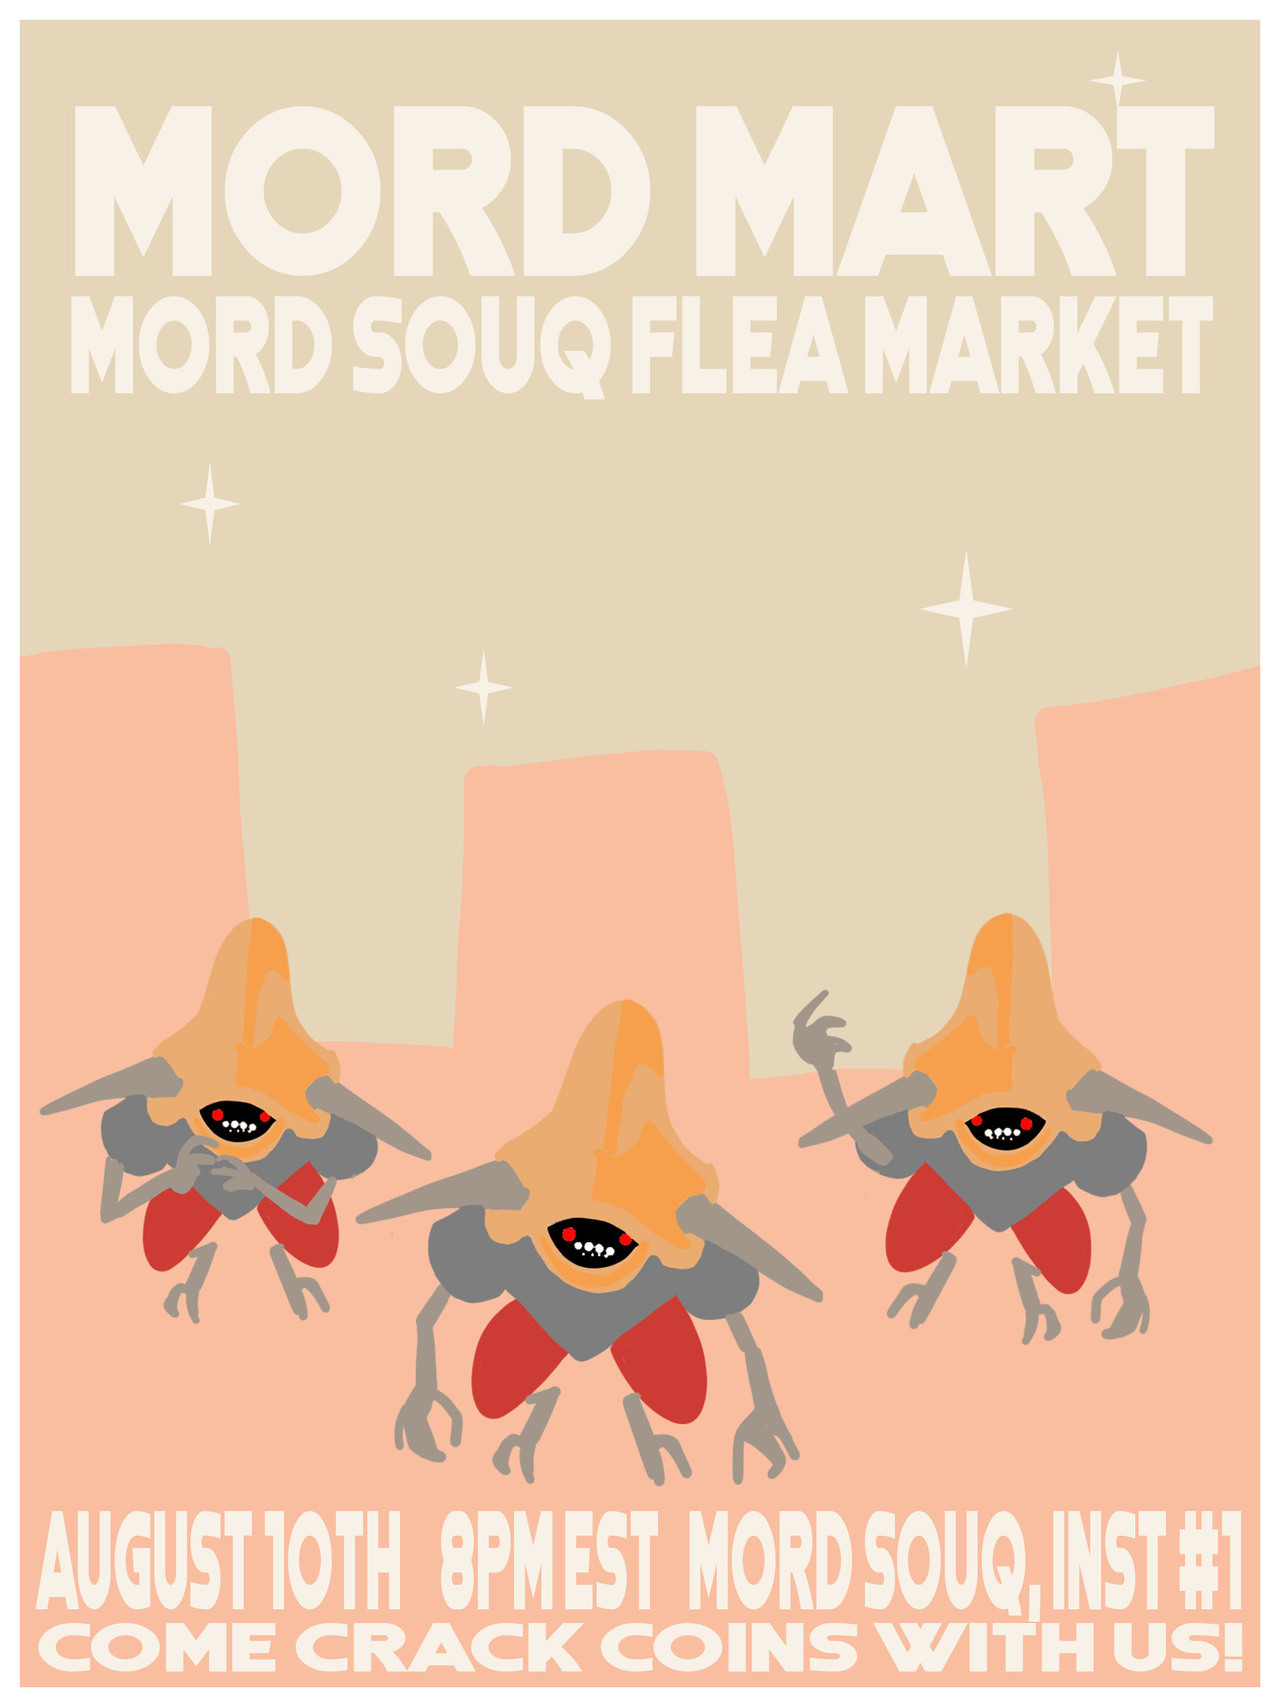 [Balmung] Mord Mart
Mord Souq Flea Market
August 10th, 8:00pm EST @ Mord Souq Instance #1“Come crack coins with us!”
In Mord Souq, everything is always on sale! This market welcomes vendors from all over to come crack their coins and show off their...